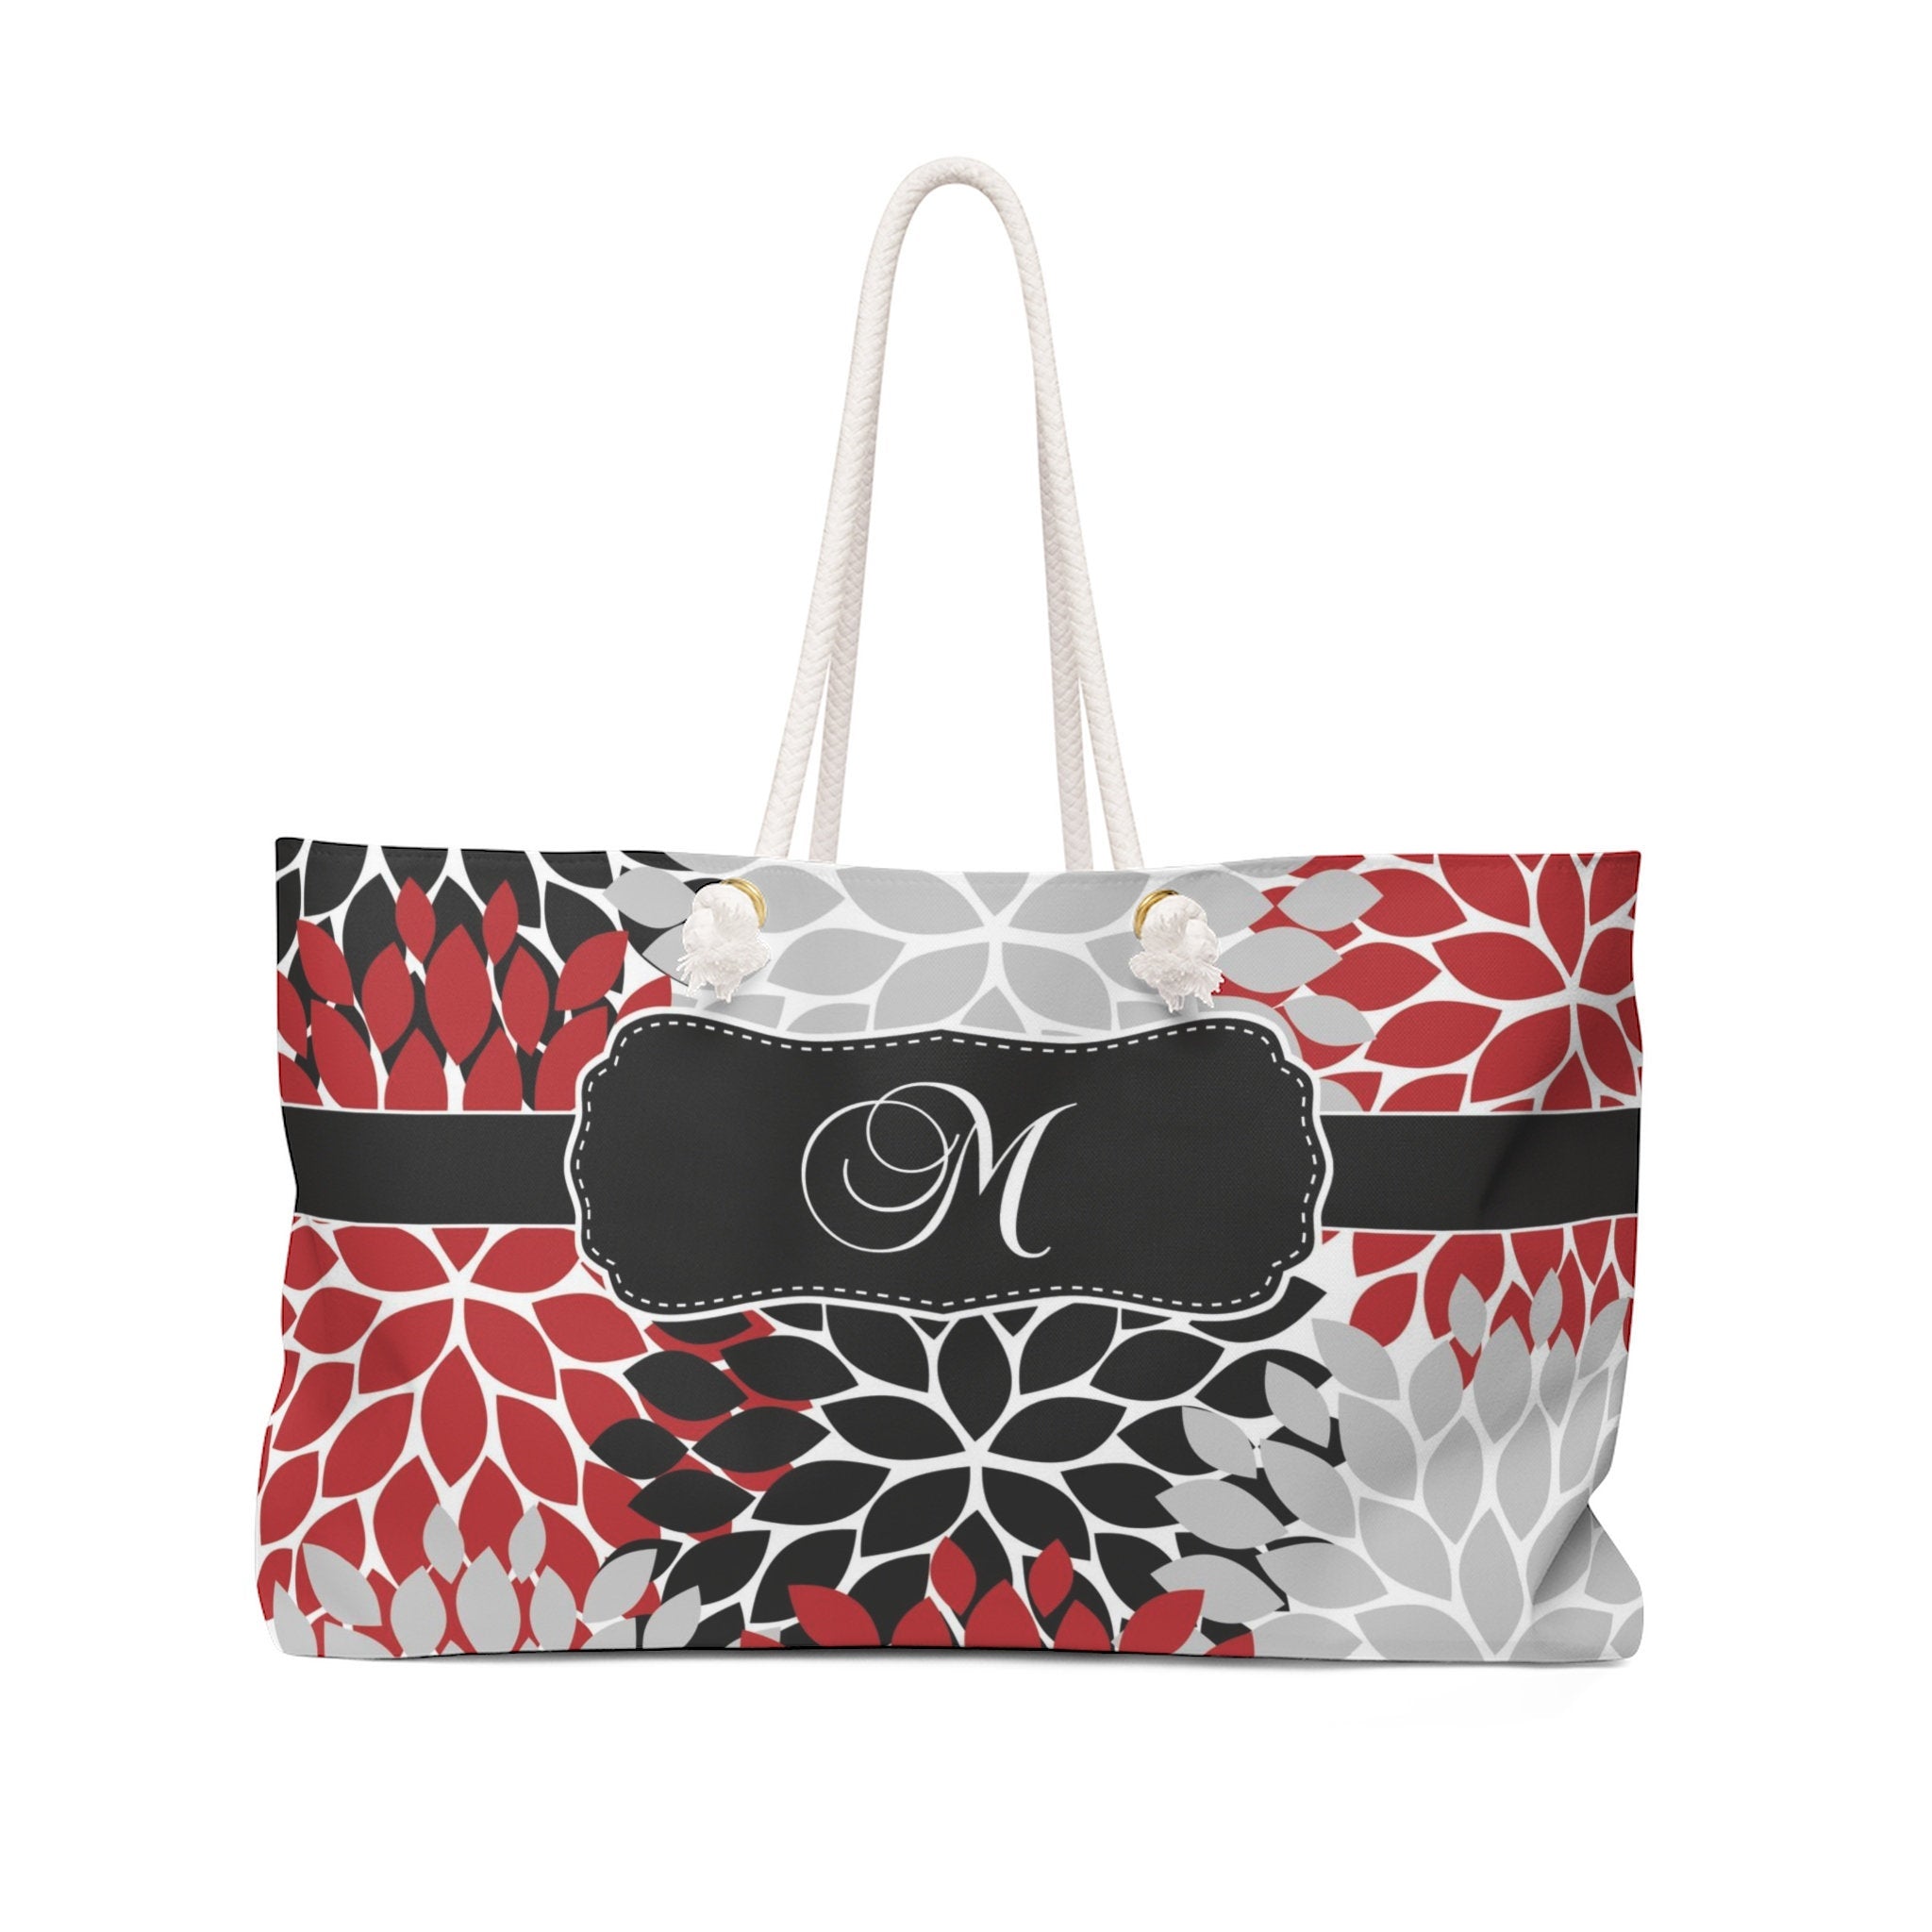 Monogrammed Tote Bags & Personalized Beach Bags